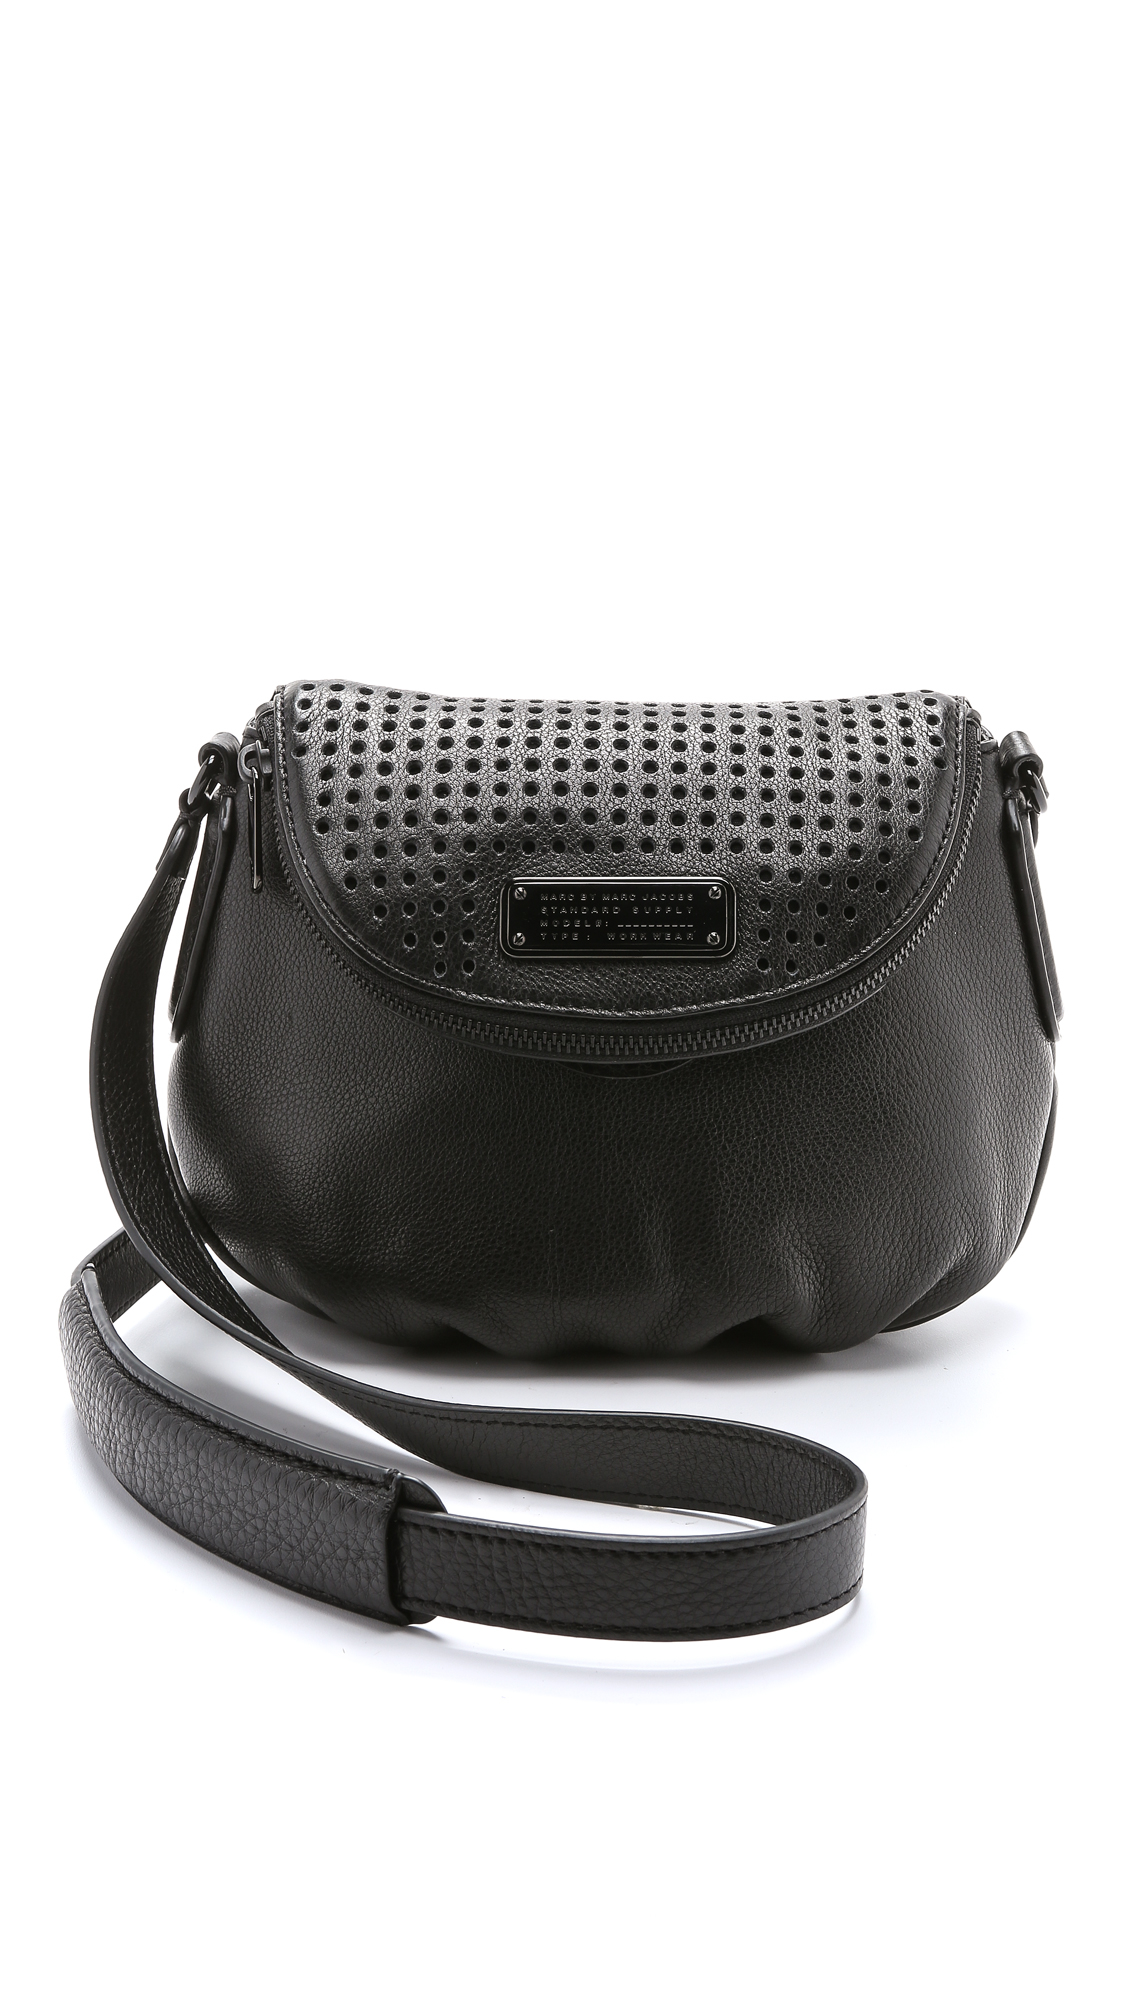 Marc By Marc Jacobs New Q Perforated Mini Natasha Bag - Leche in